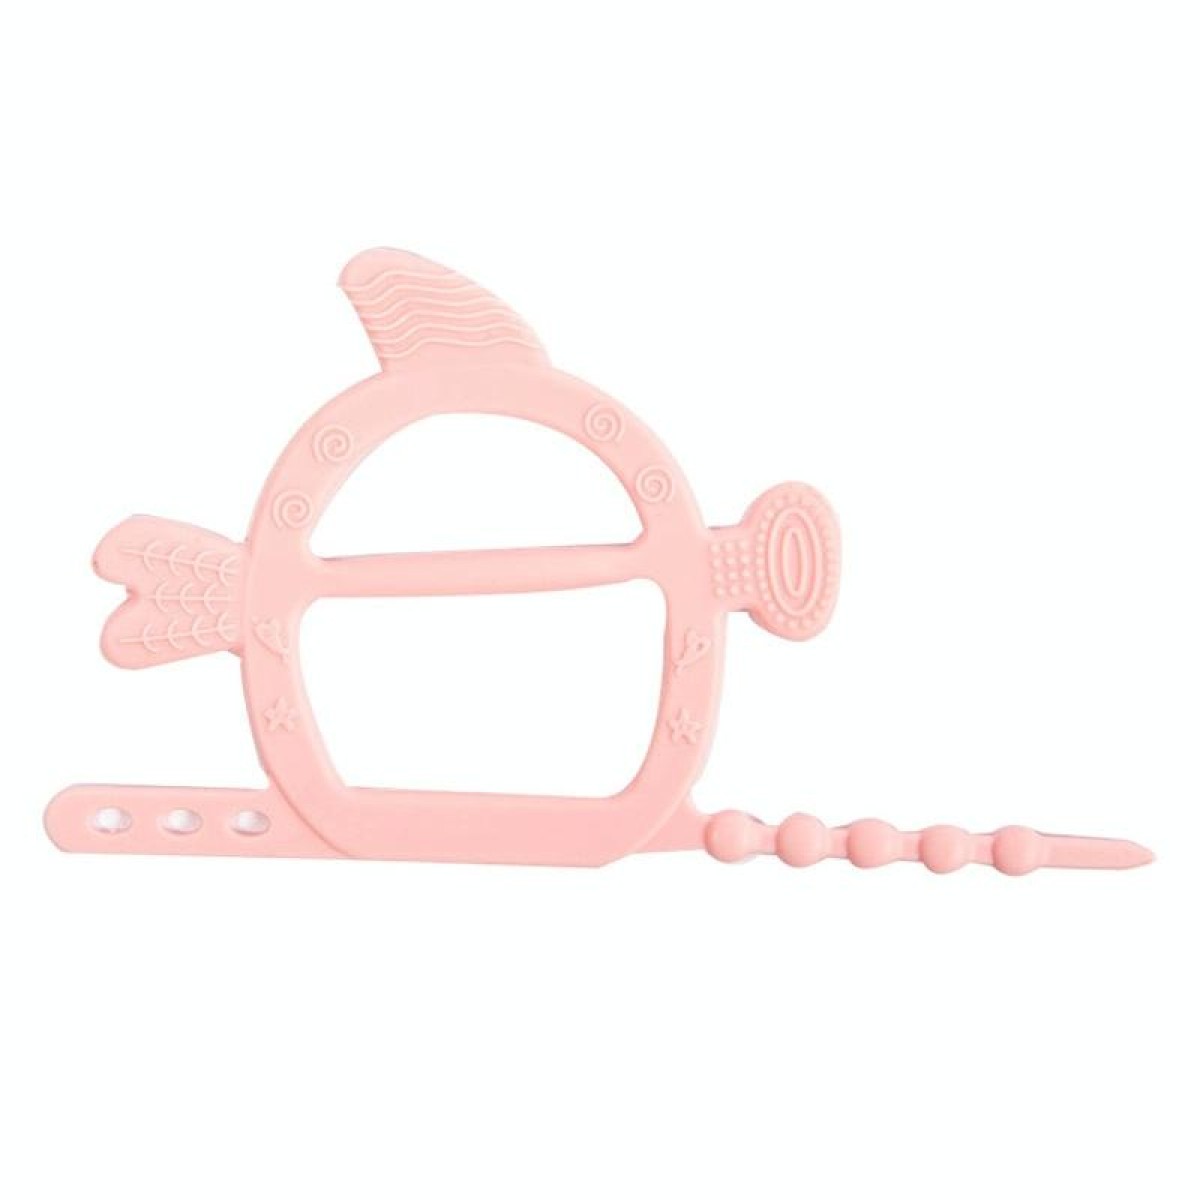 M010075 4 PCS Baby Silicone Teether Toys Baby Molar Sticks Maternal and Child Products(Pink)